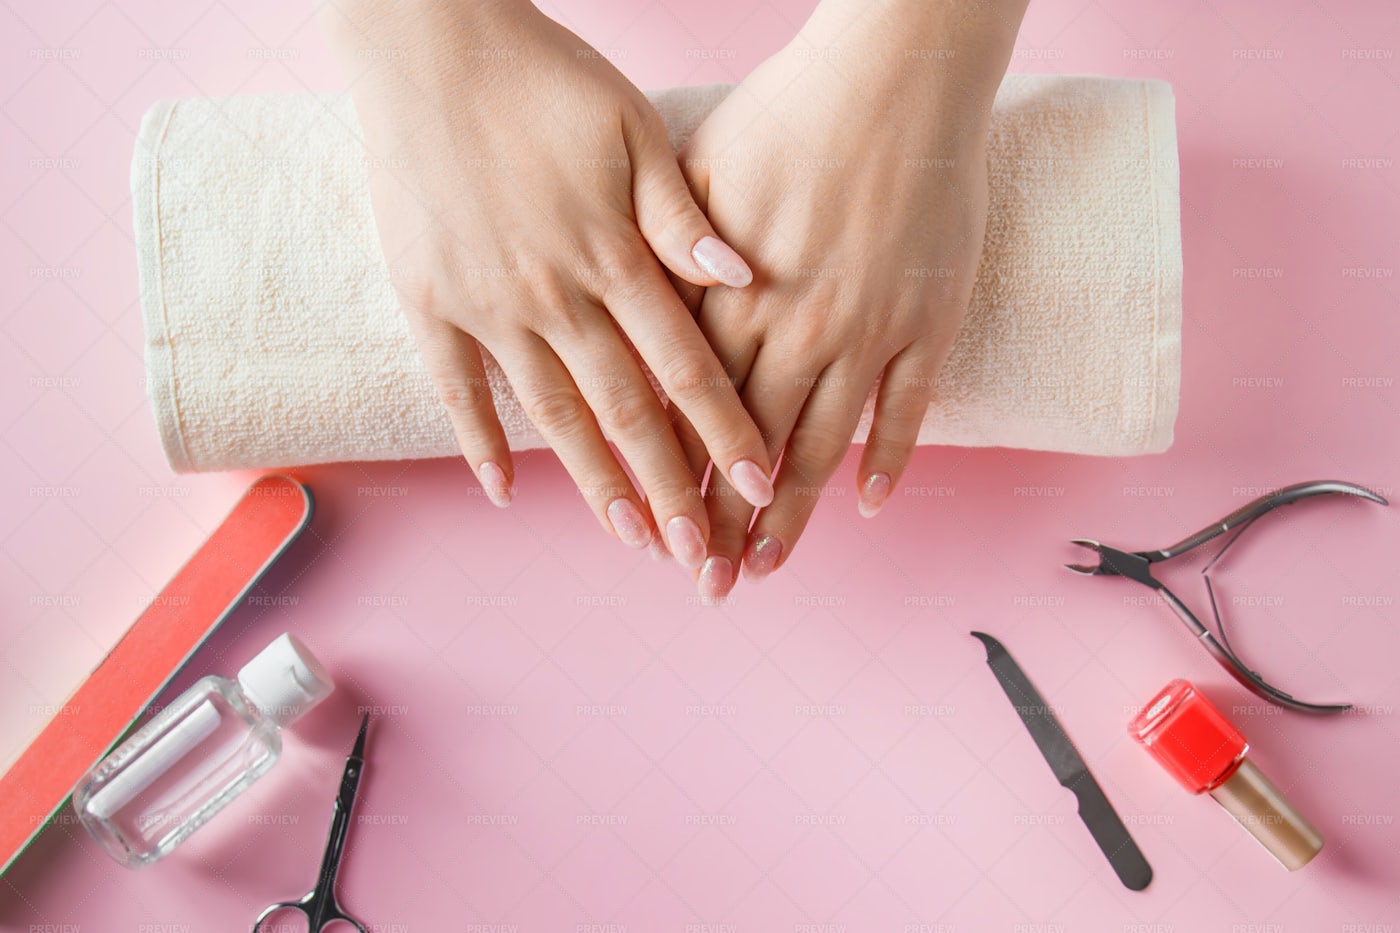 2. The Importance of Nail Care in Nursing - wide 7